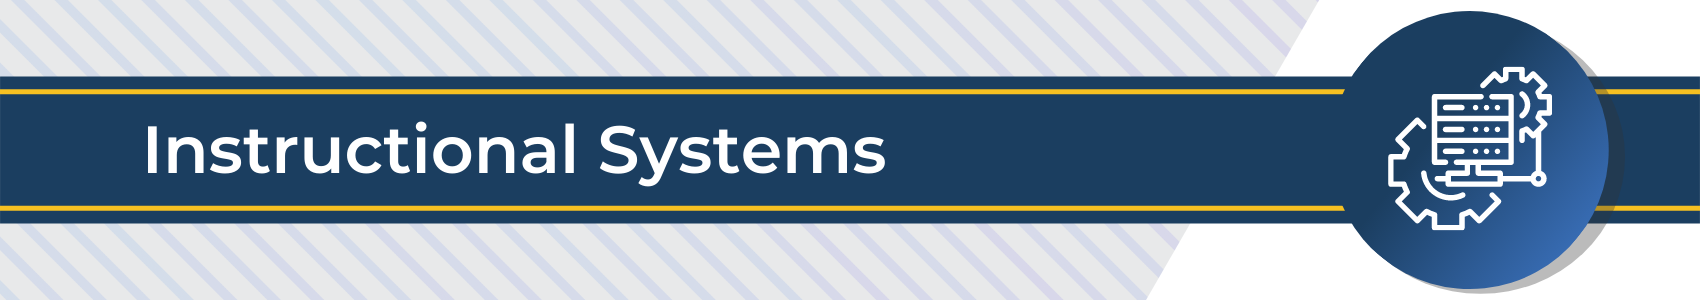 Instructional Systems banner